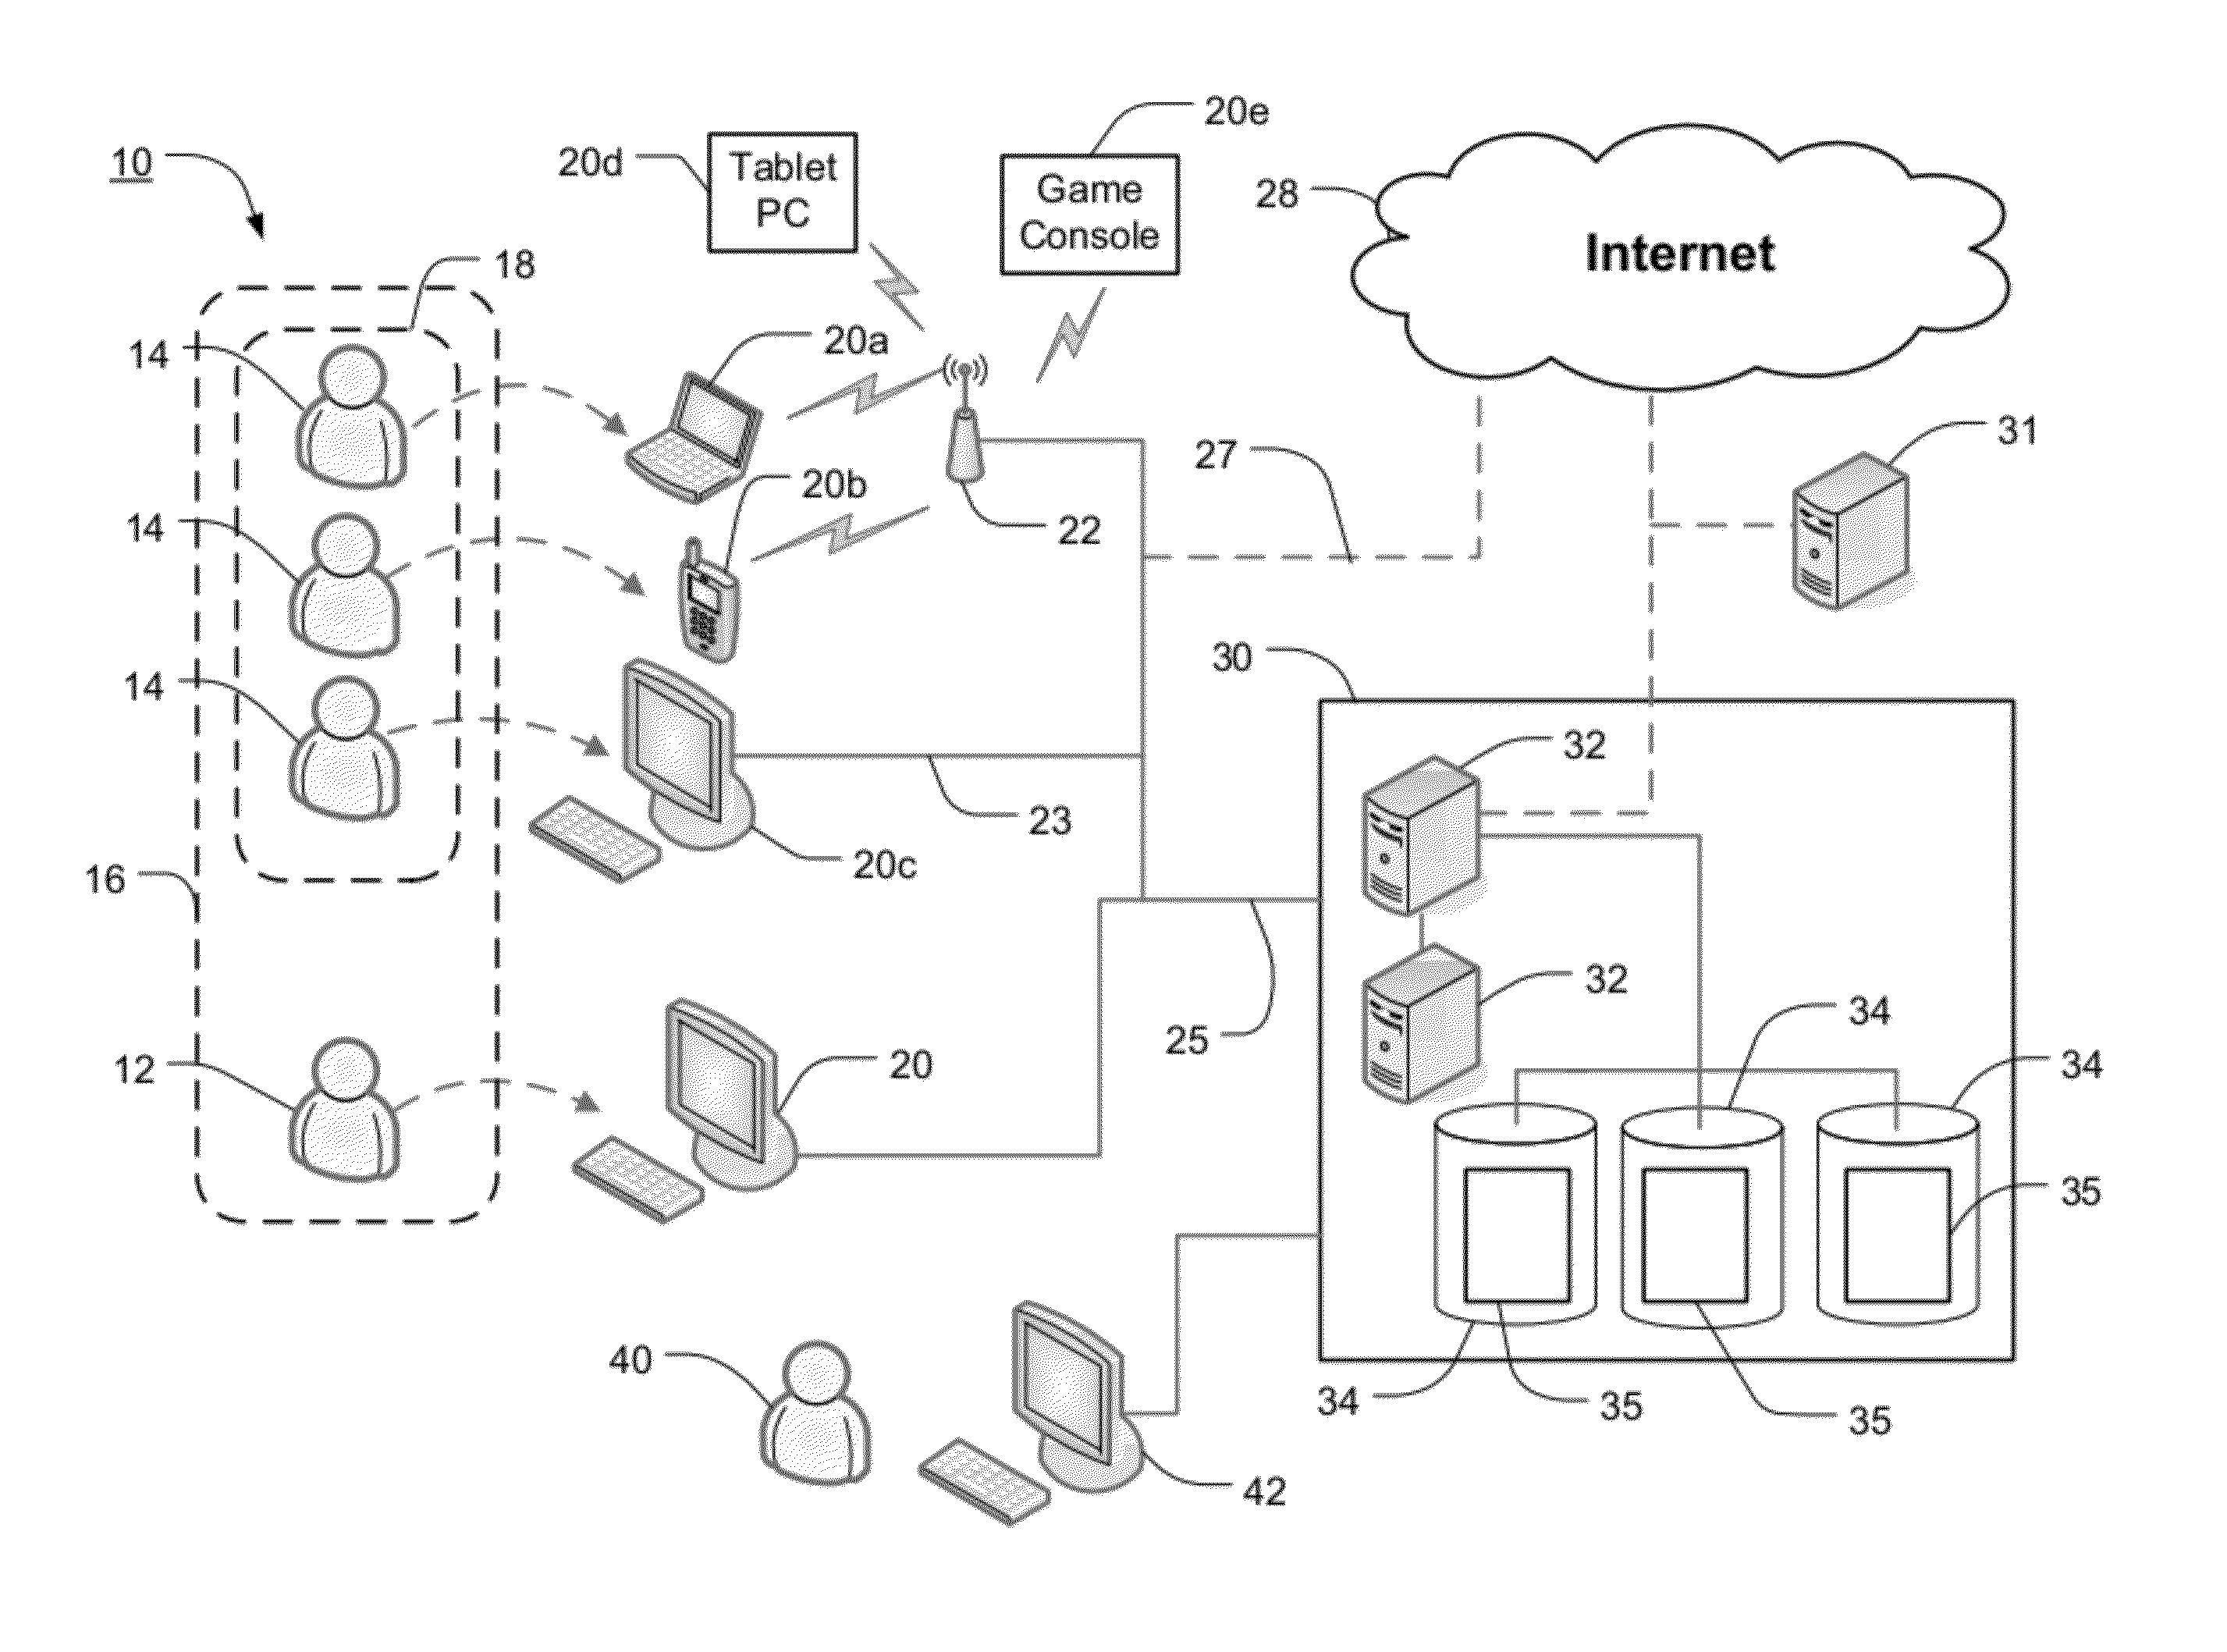 Systems and methods for providing learning modules for learning systems